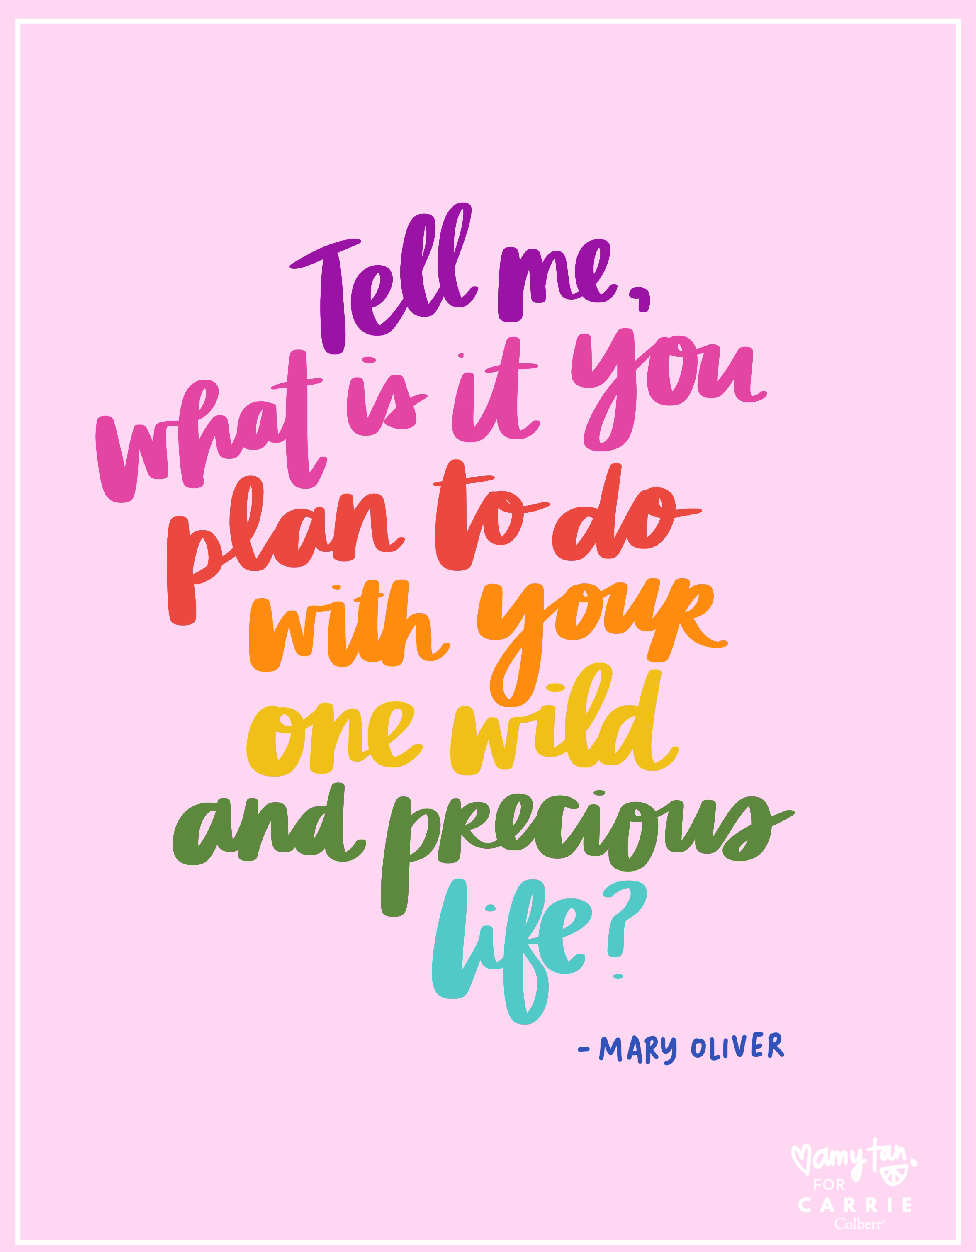 Mary Oliver’s “What are you going to do with your one wild and precious life?” quote from Amy Tan x Carrie Colbert